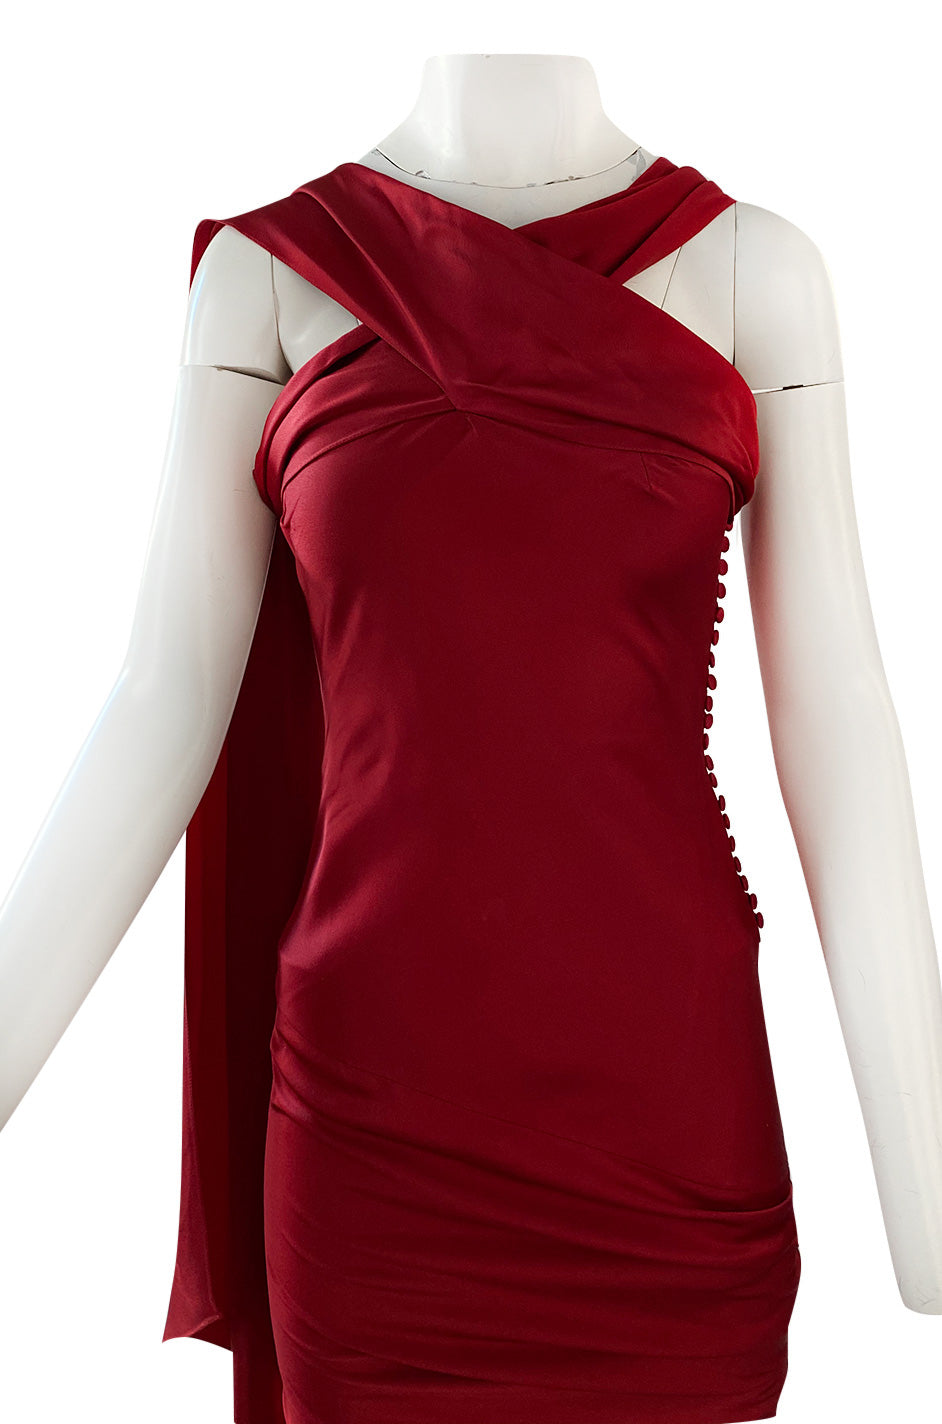 Early 2000s Dior Christian Dior by John Galliano Deep Red Satin Finish ...